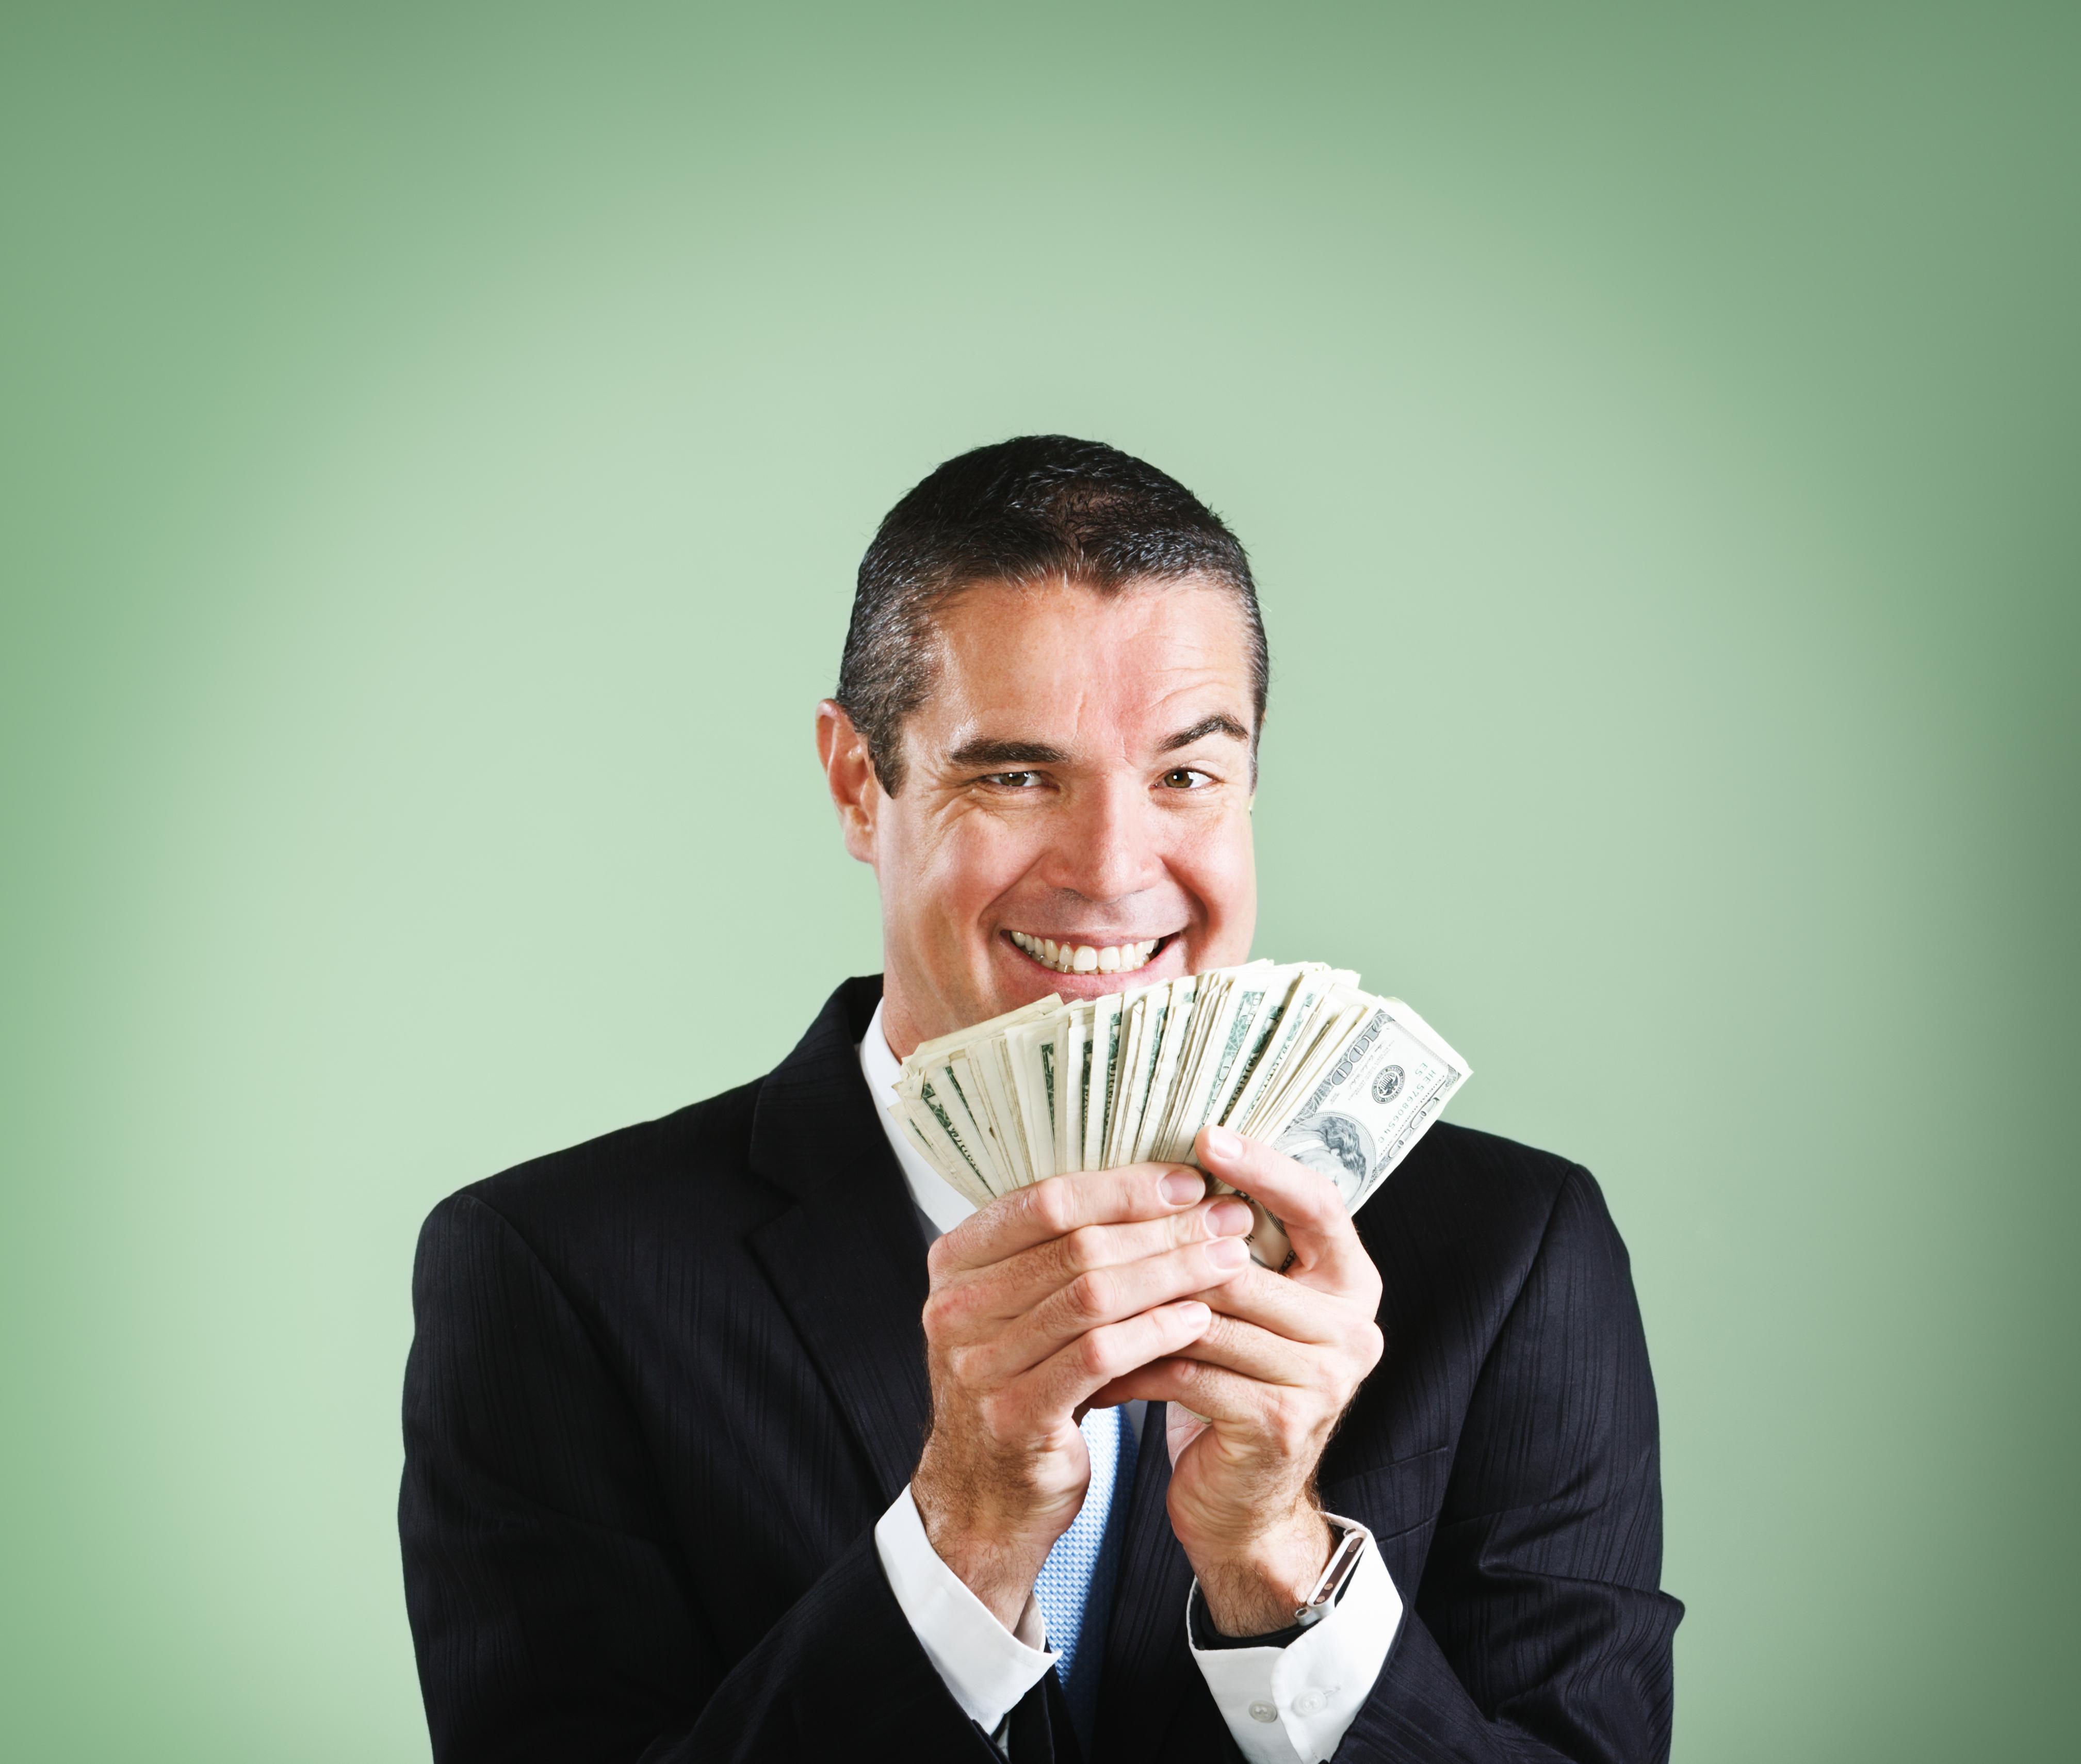 Gleeful businesman grins, gloating over fistful of dollars | Source: Getty Images